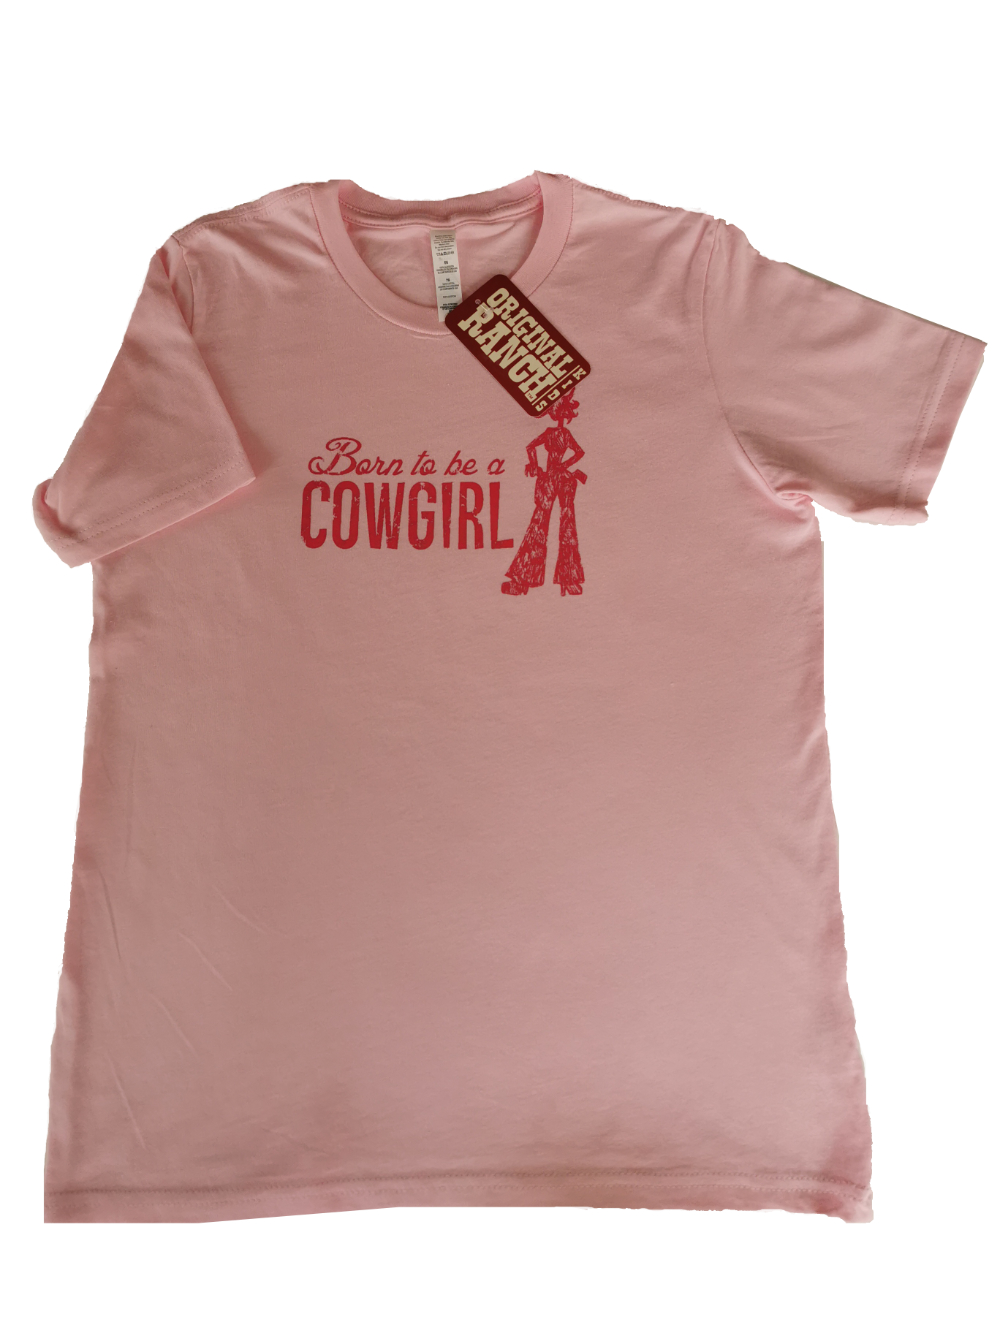 Girls' T-shirt "Born to be a Cowgirl" Pink